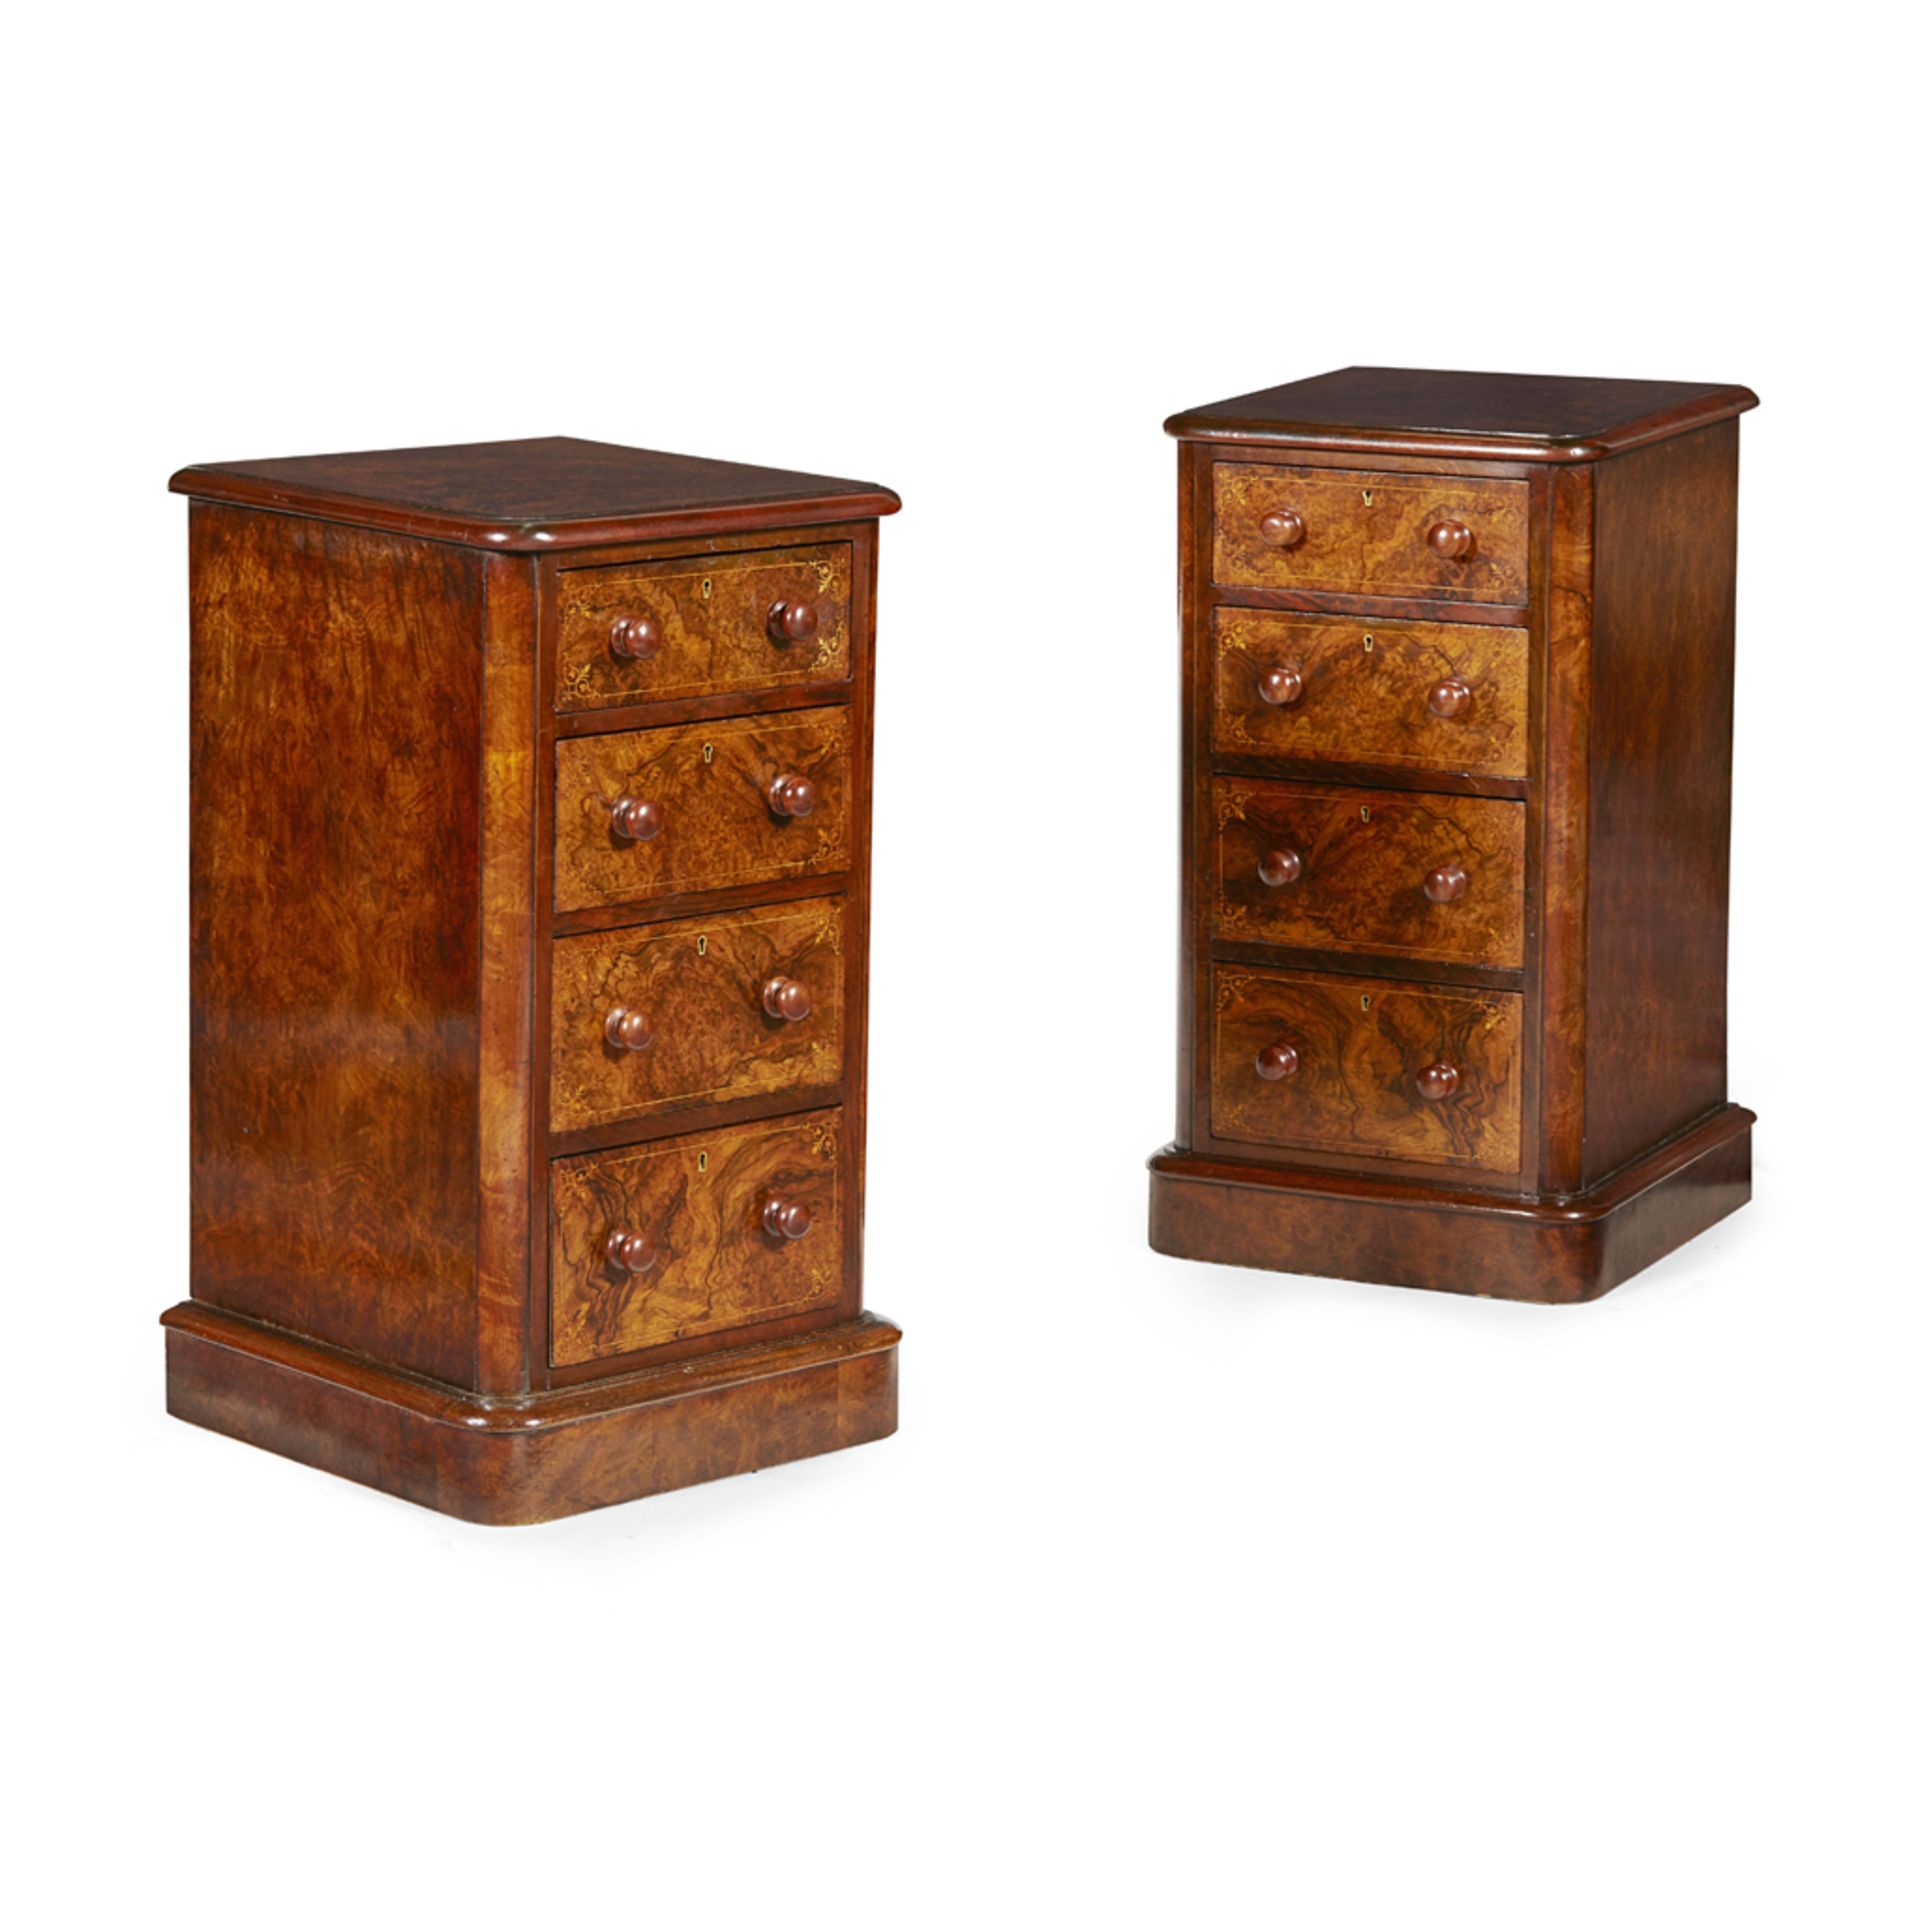 PAIR OF VICTORIAN BURR WALNUT AND INLAY BEDSIDE CHESTS 19TH CENTURY WITH ALTERATIONS the rectangular